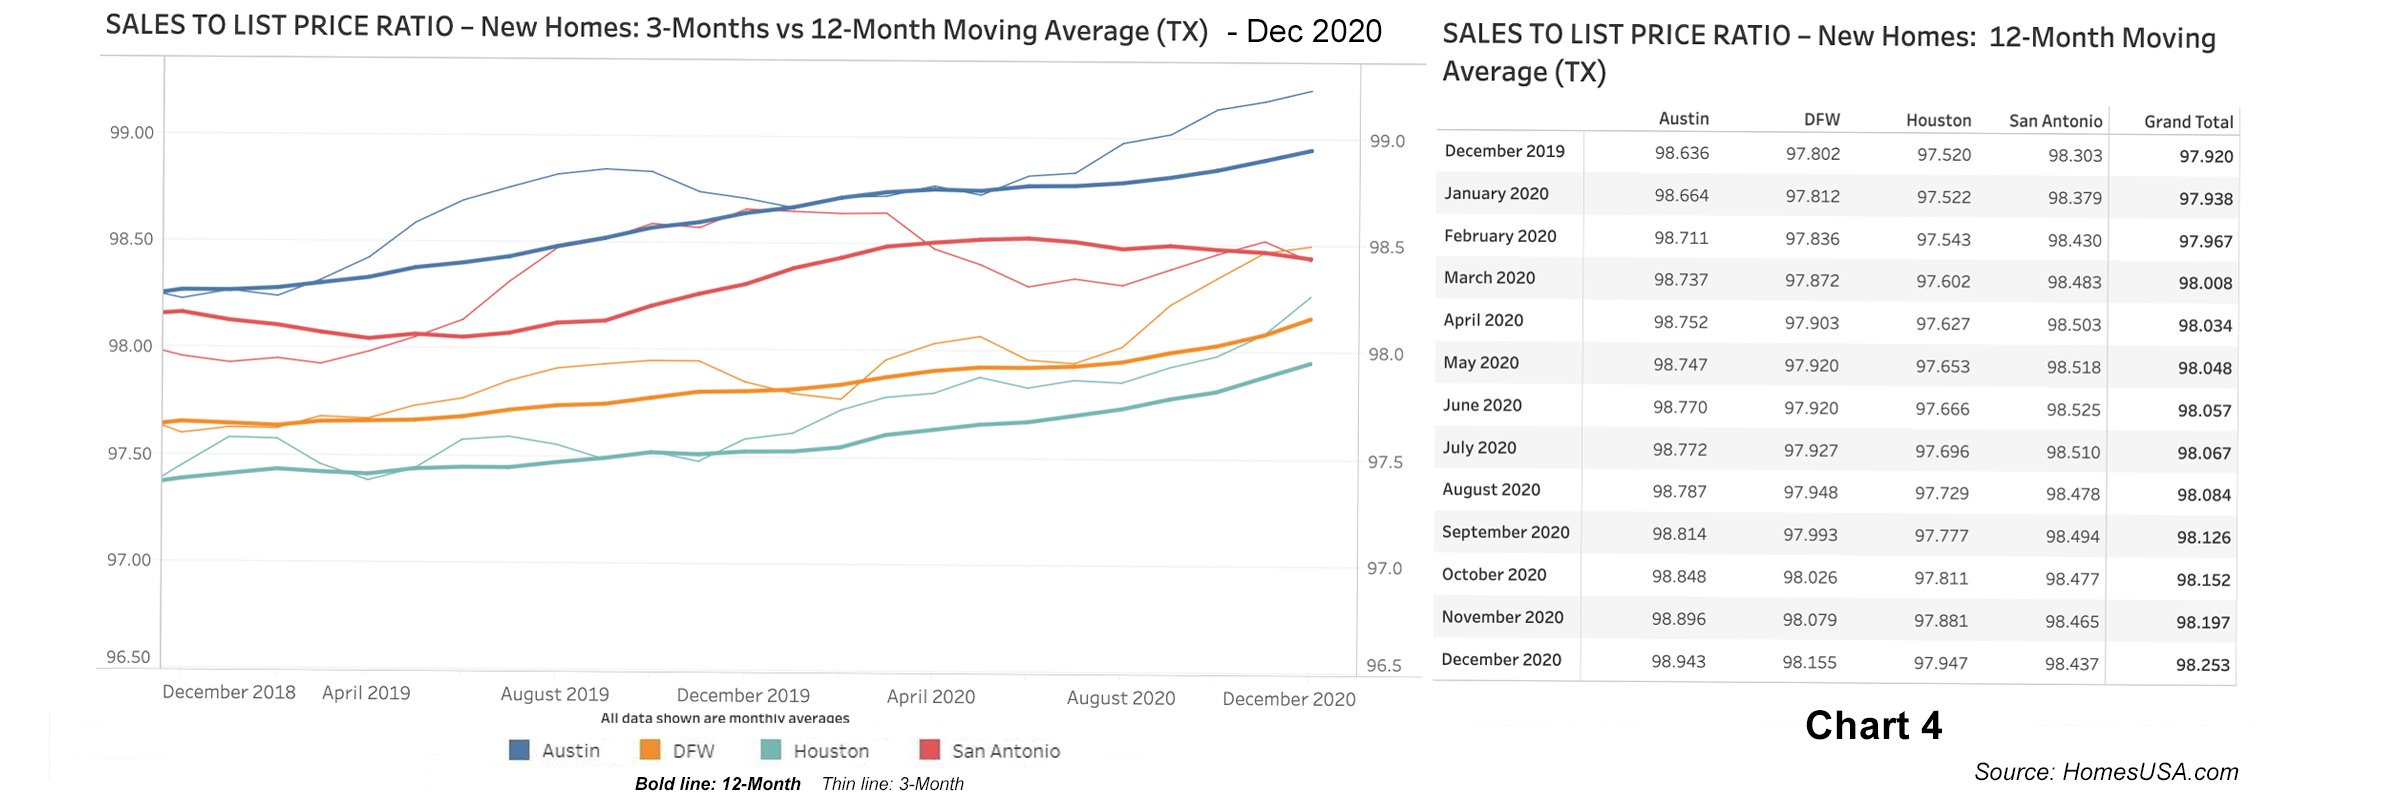 Chart 4: Sales-to-List-Price Ratio Data for Texas New Homes - December 2020